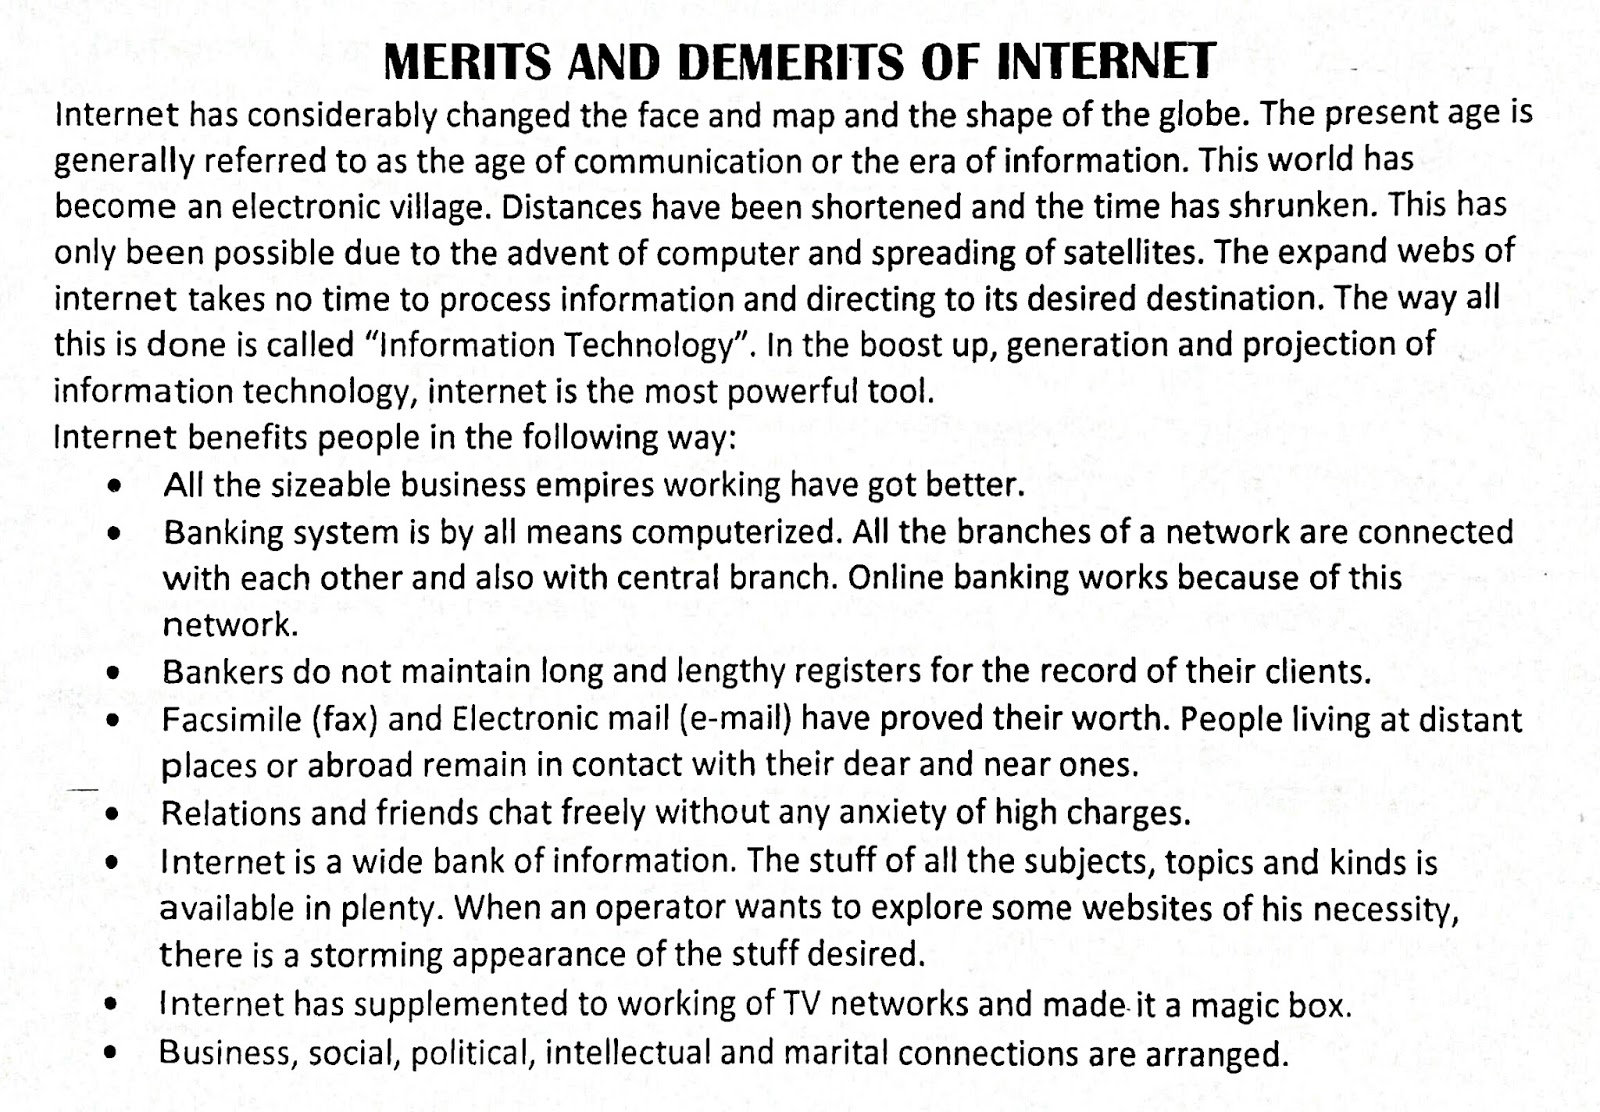 merits and demerits of internet essay for class 8